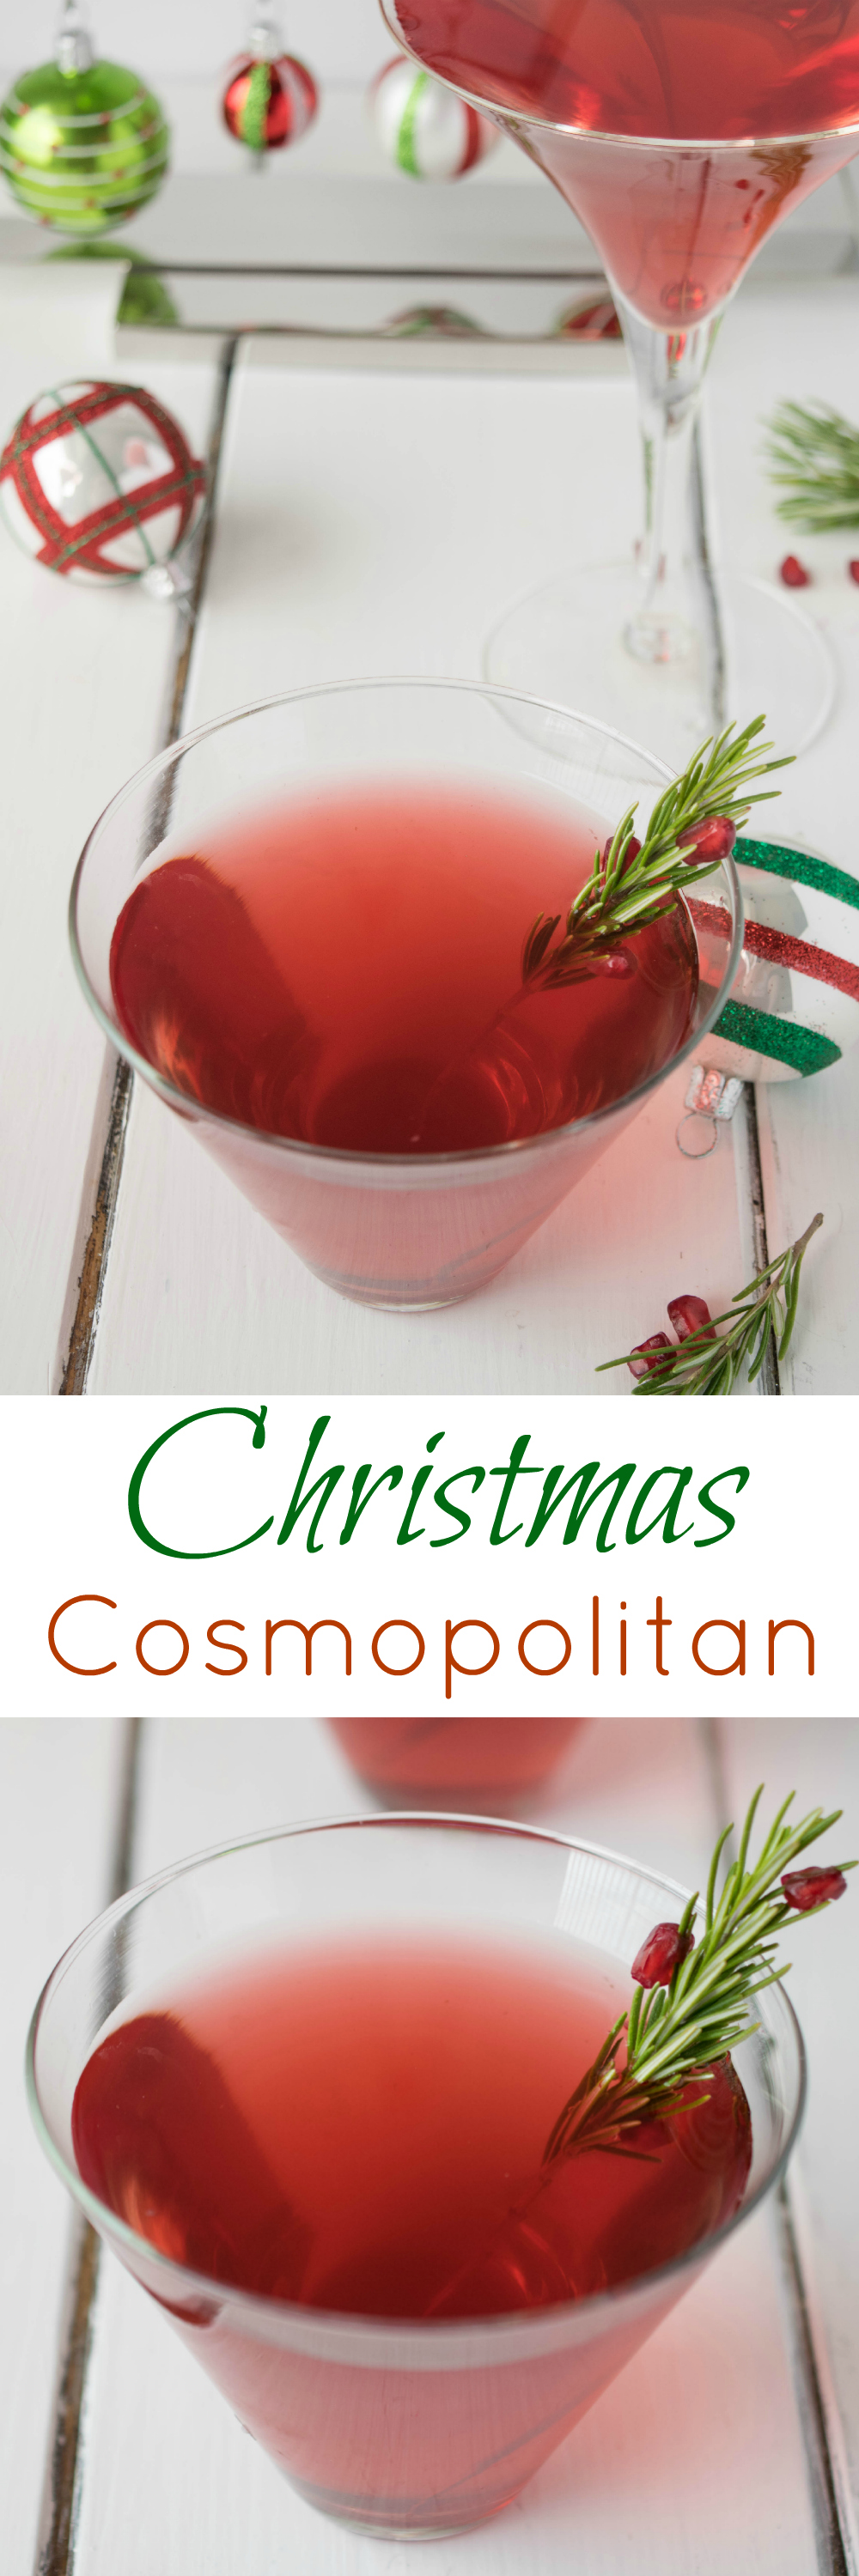 Christmas Cosmopolitan is made with pomegranate juice, ginger beer (or ale) for sweetness and, of course, vodka.